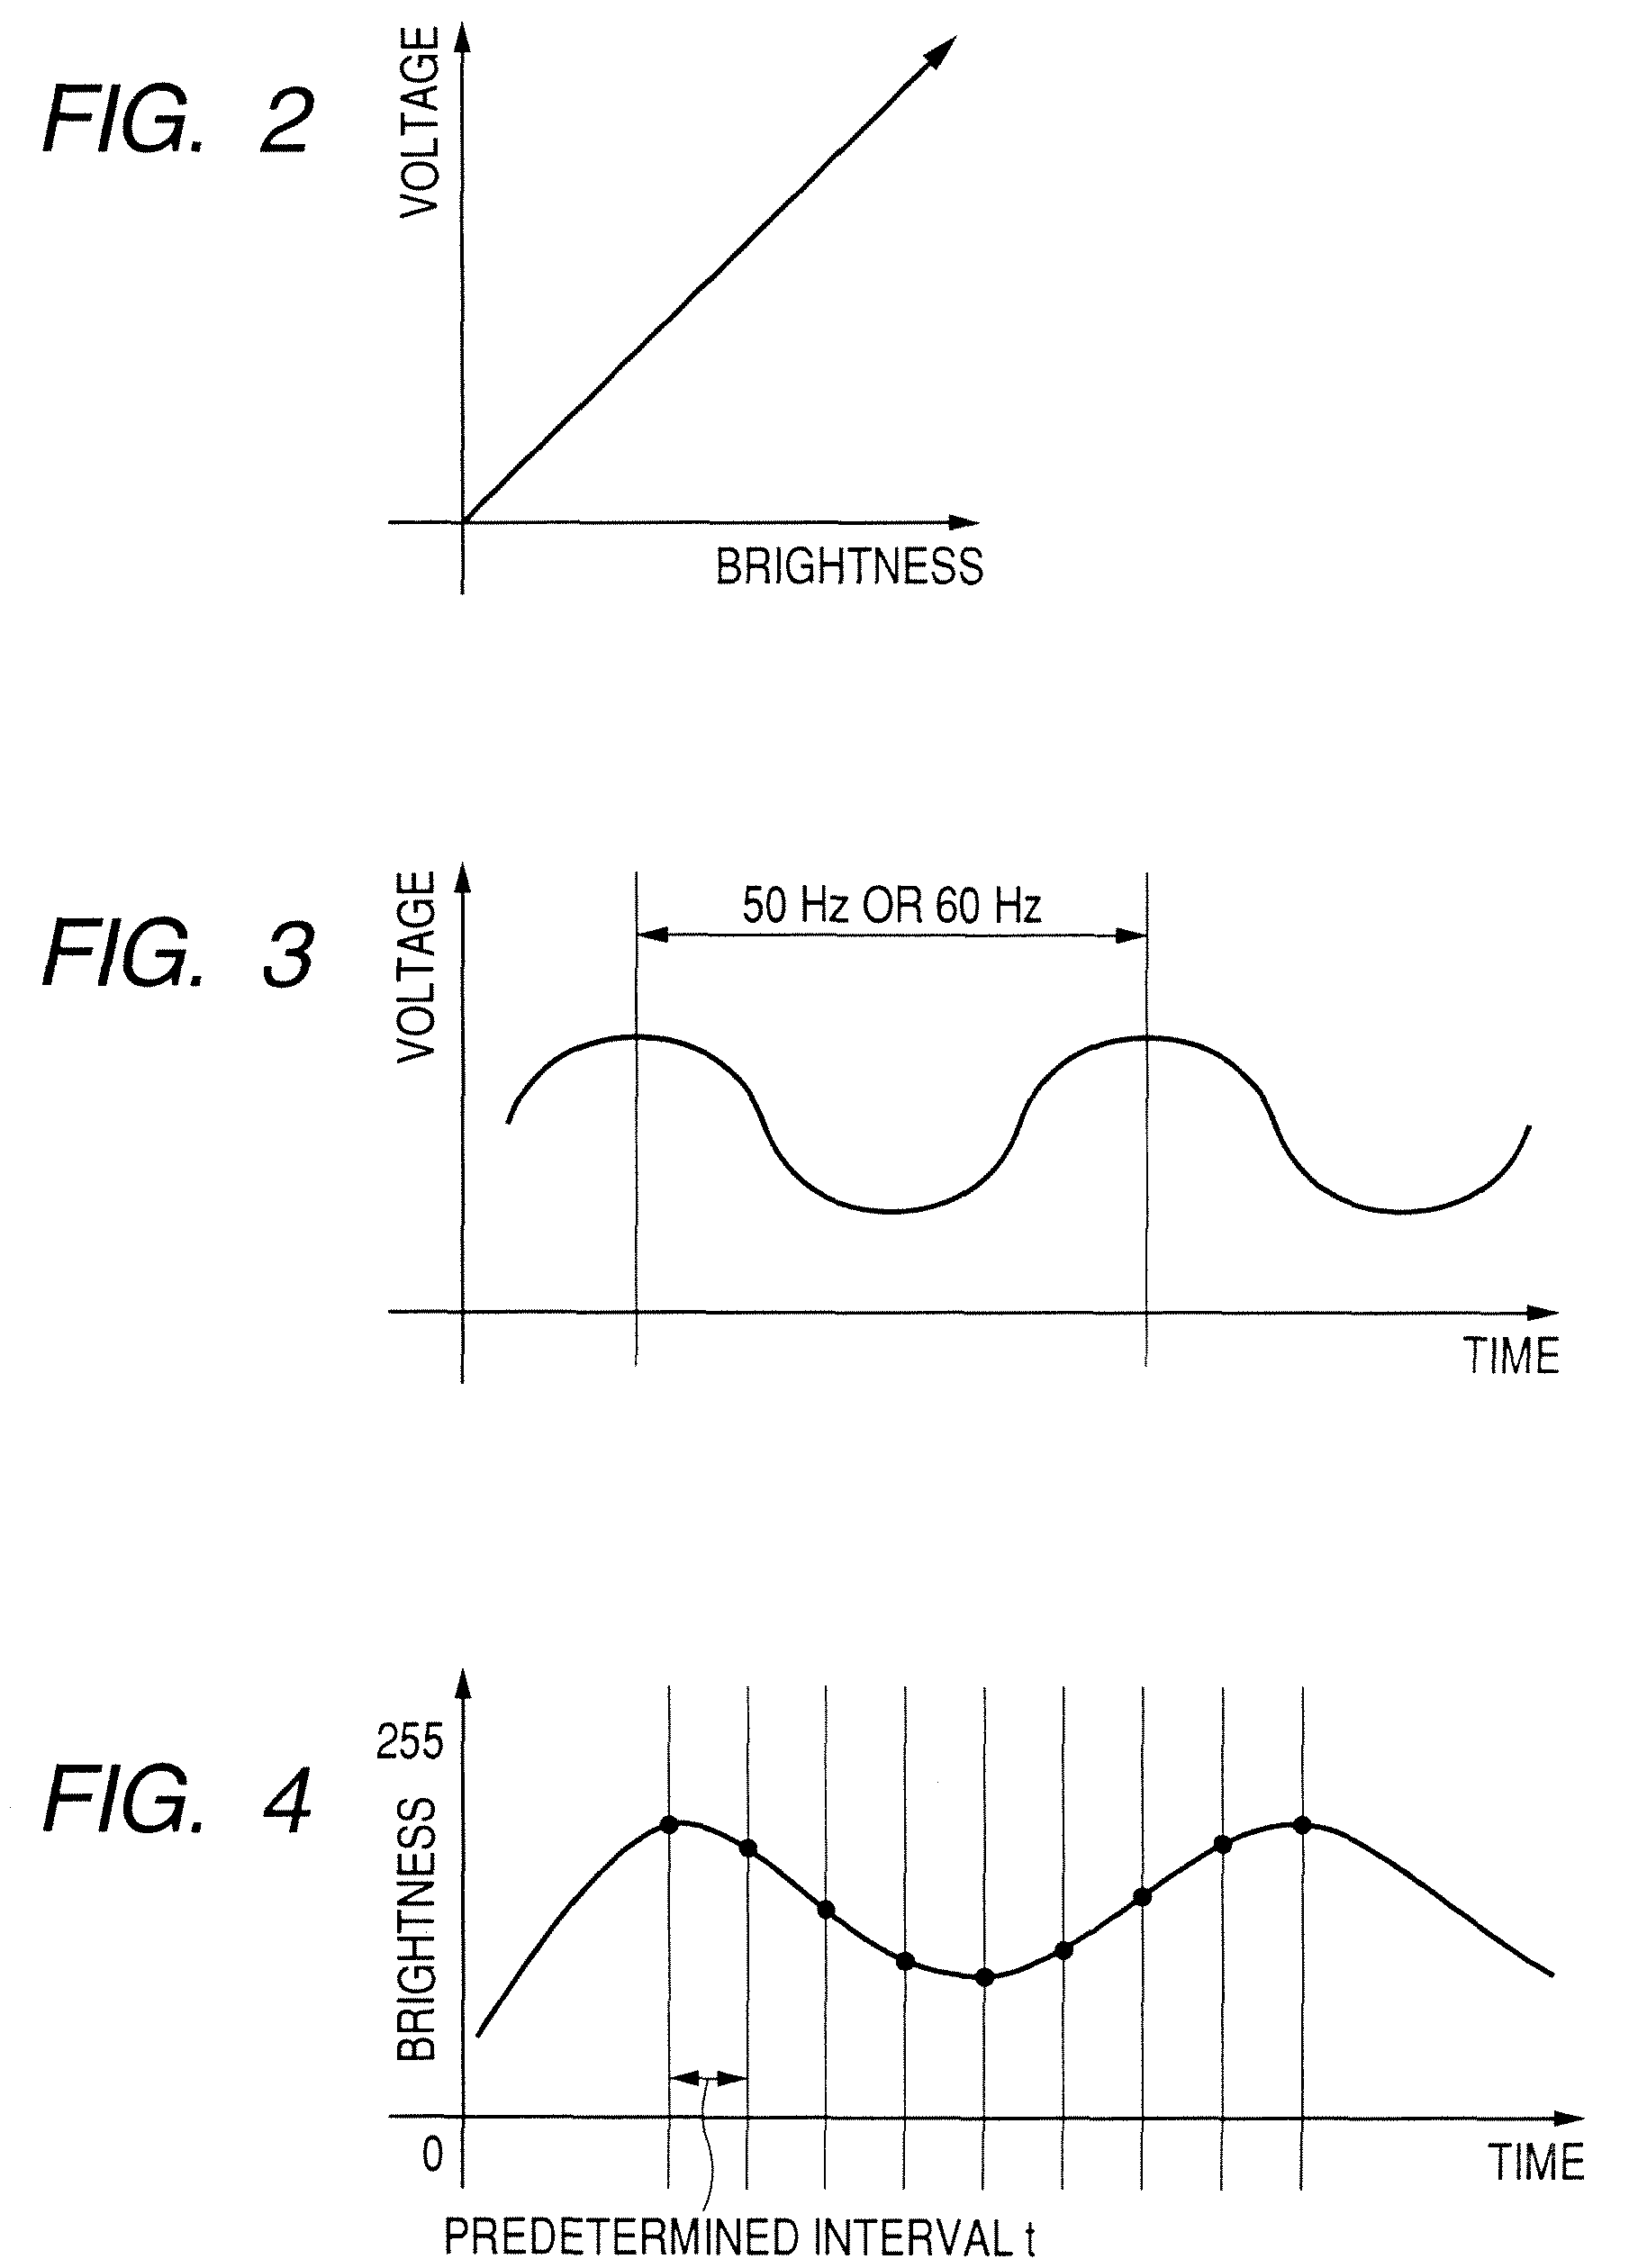 Imaging apparatus and imaging method with enhanced exposure control